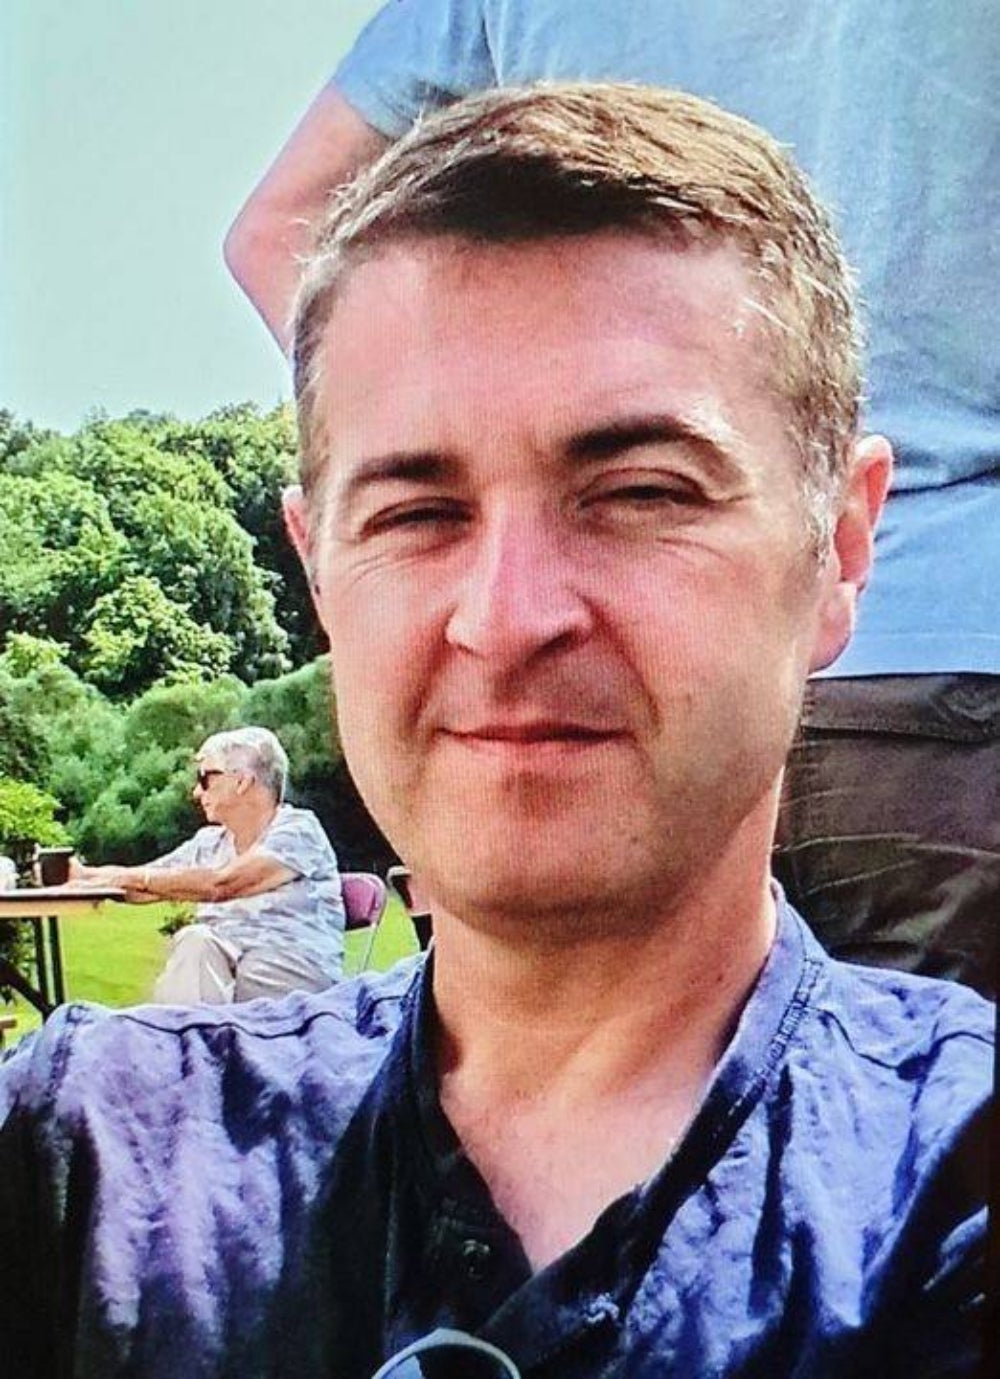 Police belive they have found the body of missing man James Turner (Police Scotland/PA)